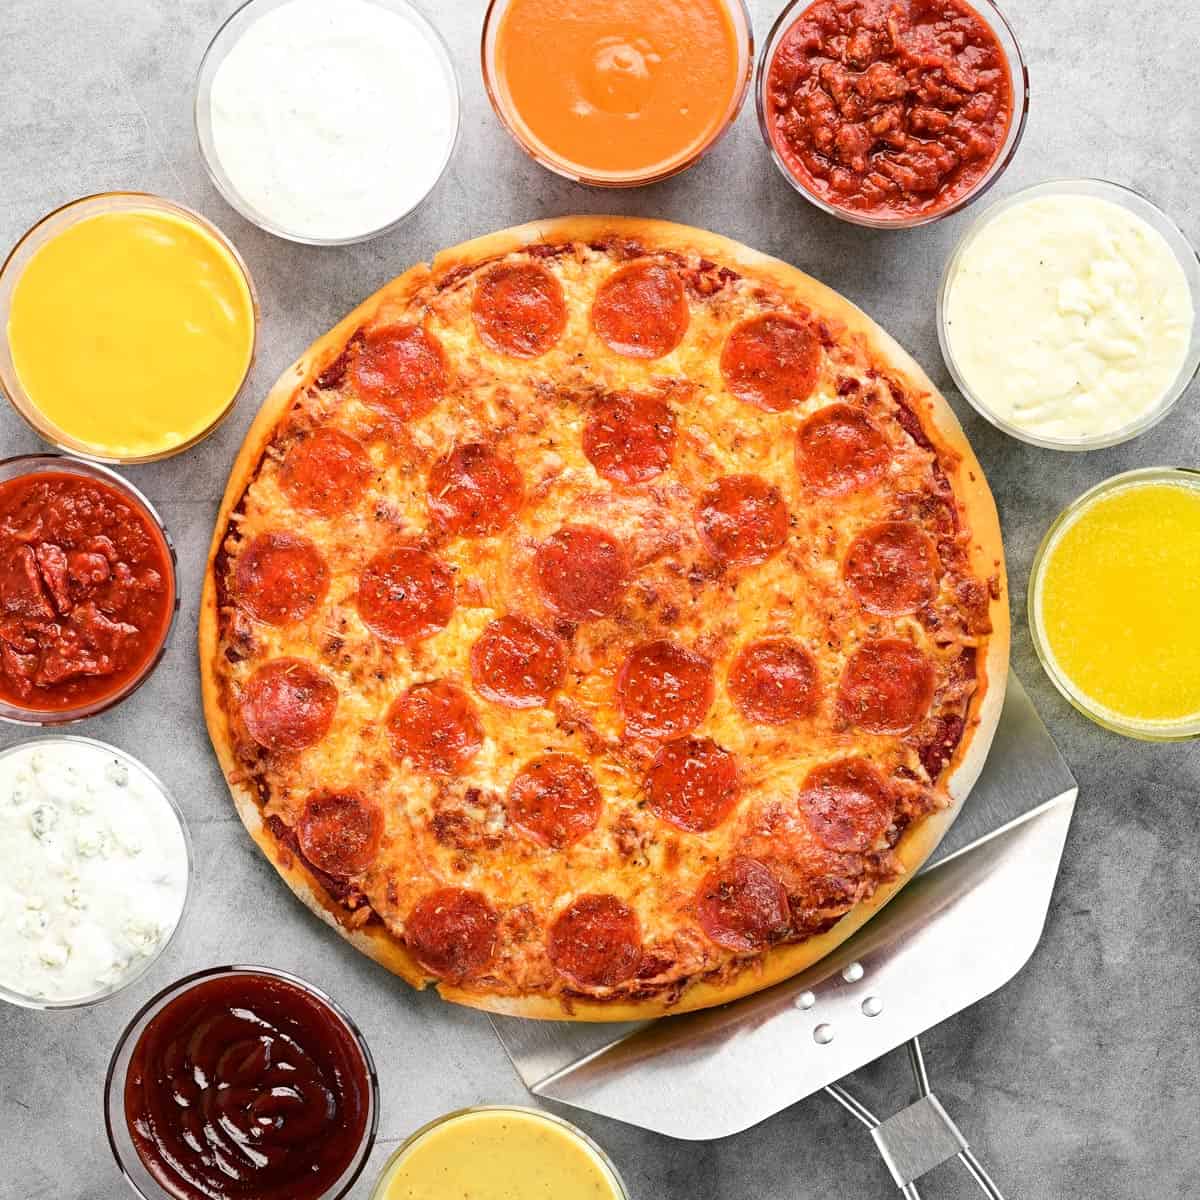 Pizza dipping sauces in bowls surrounding a pepperoni pizza.